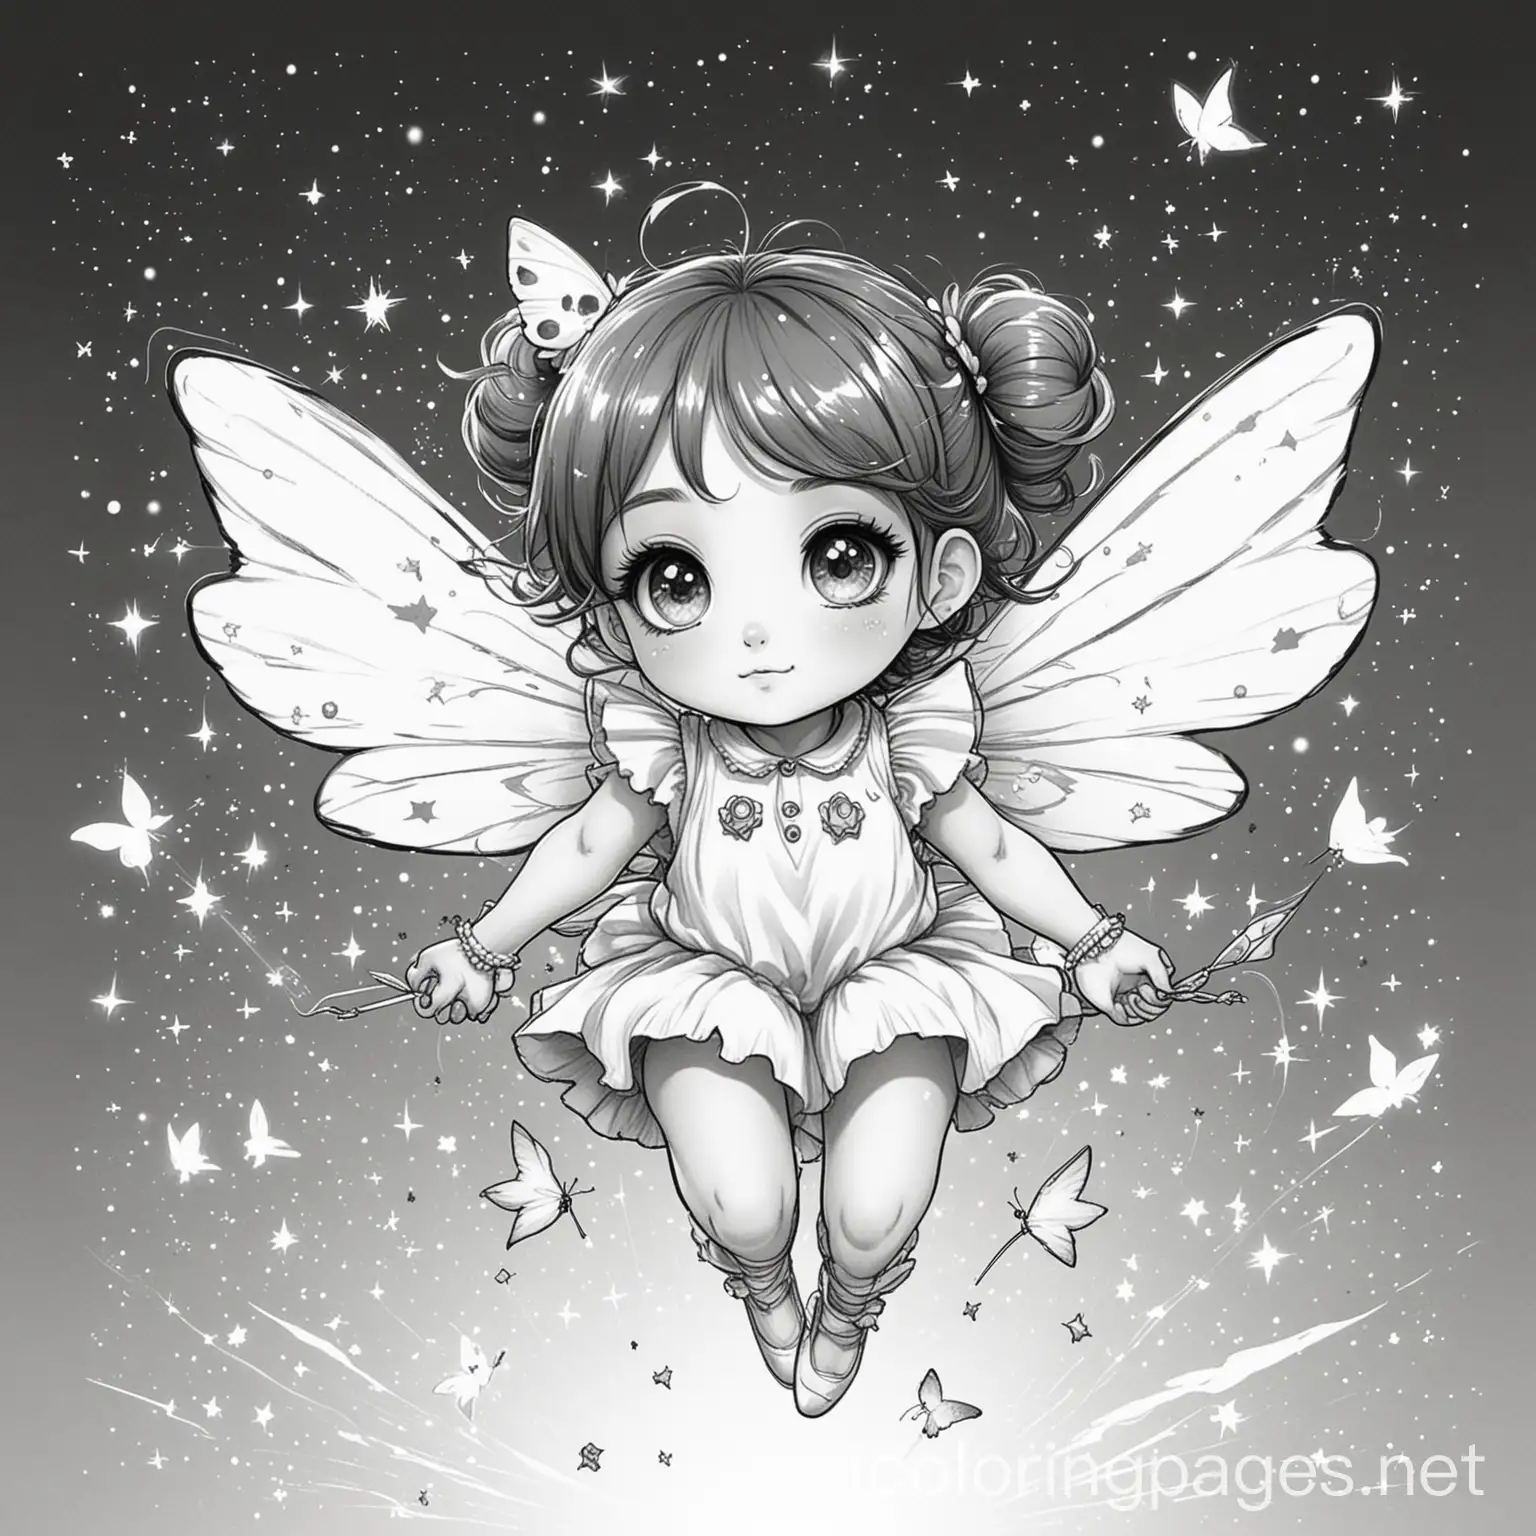 a magical girl and her pet, a small creature with butterfly wings and round fluffy body, large cute eyes and tiny antennae on top of its head, flying among the stars and the shooting stars., Coloring Page, black and white, line art, white background, Simplicity, Ample White Space